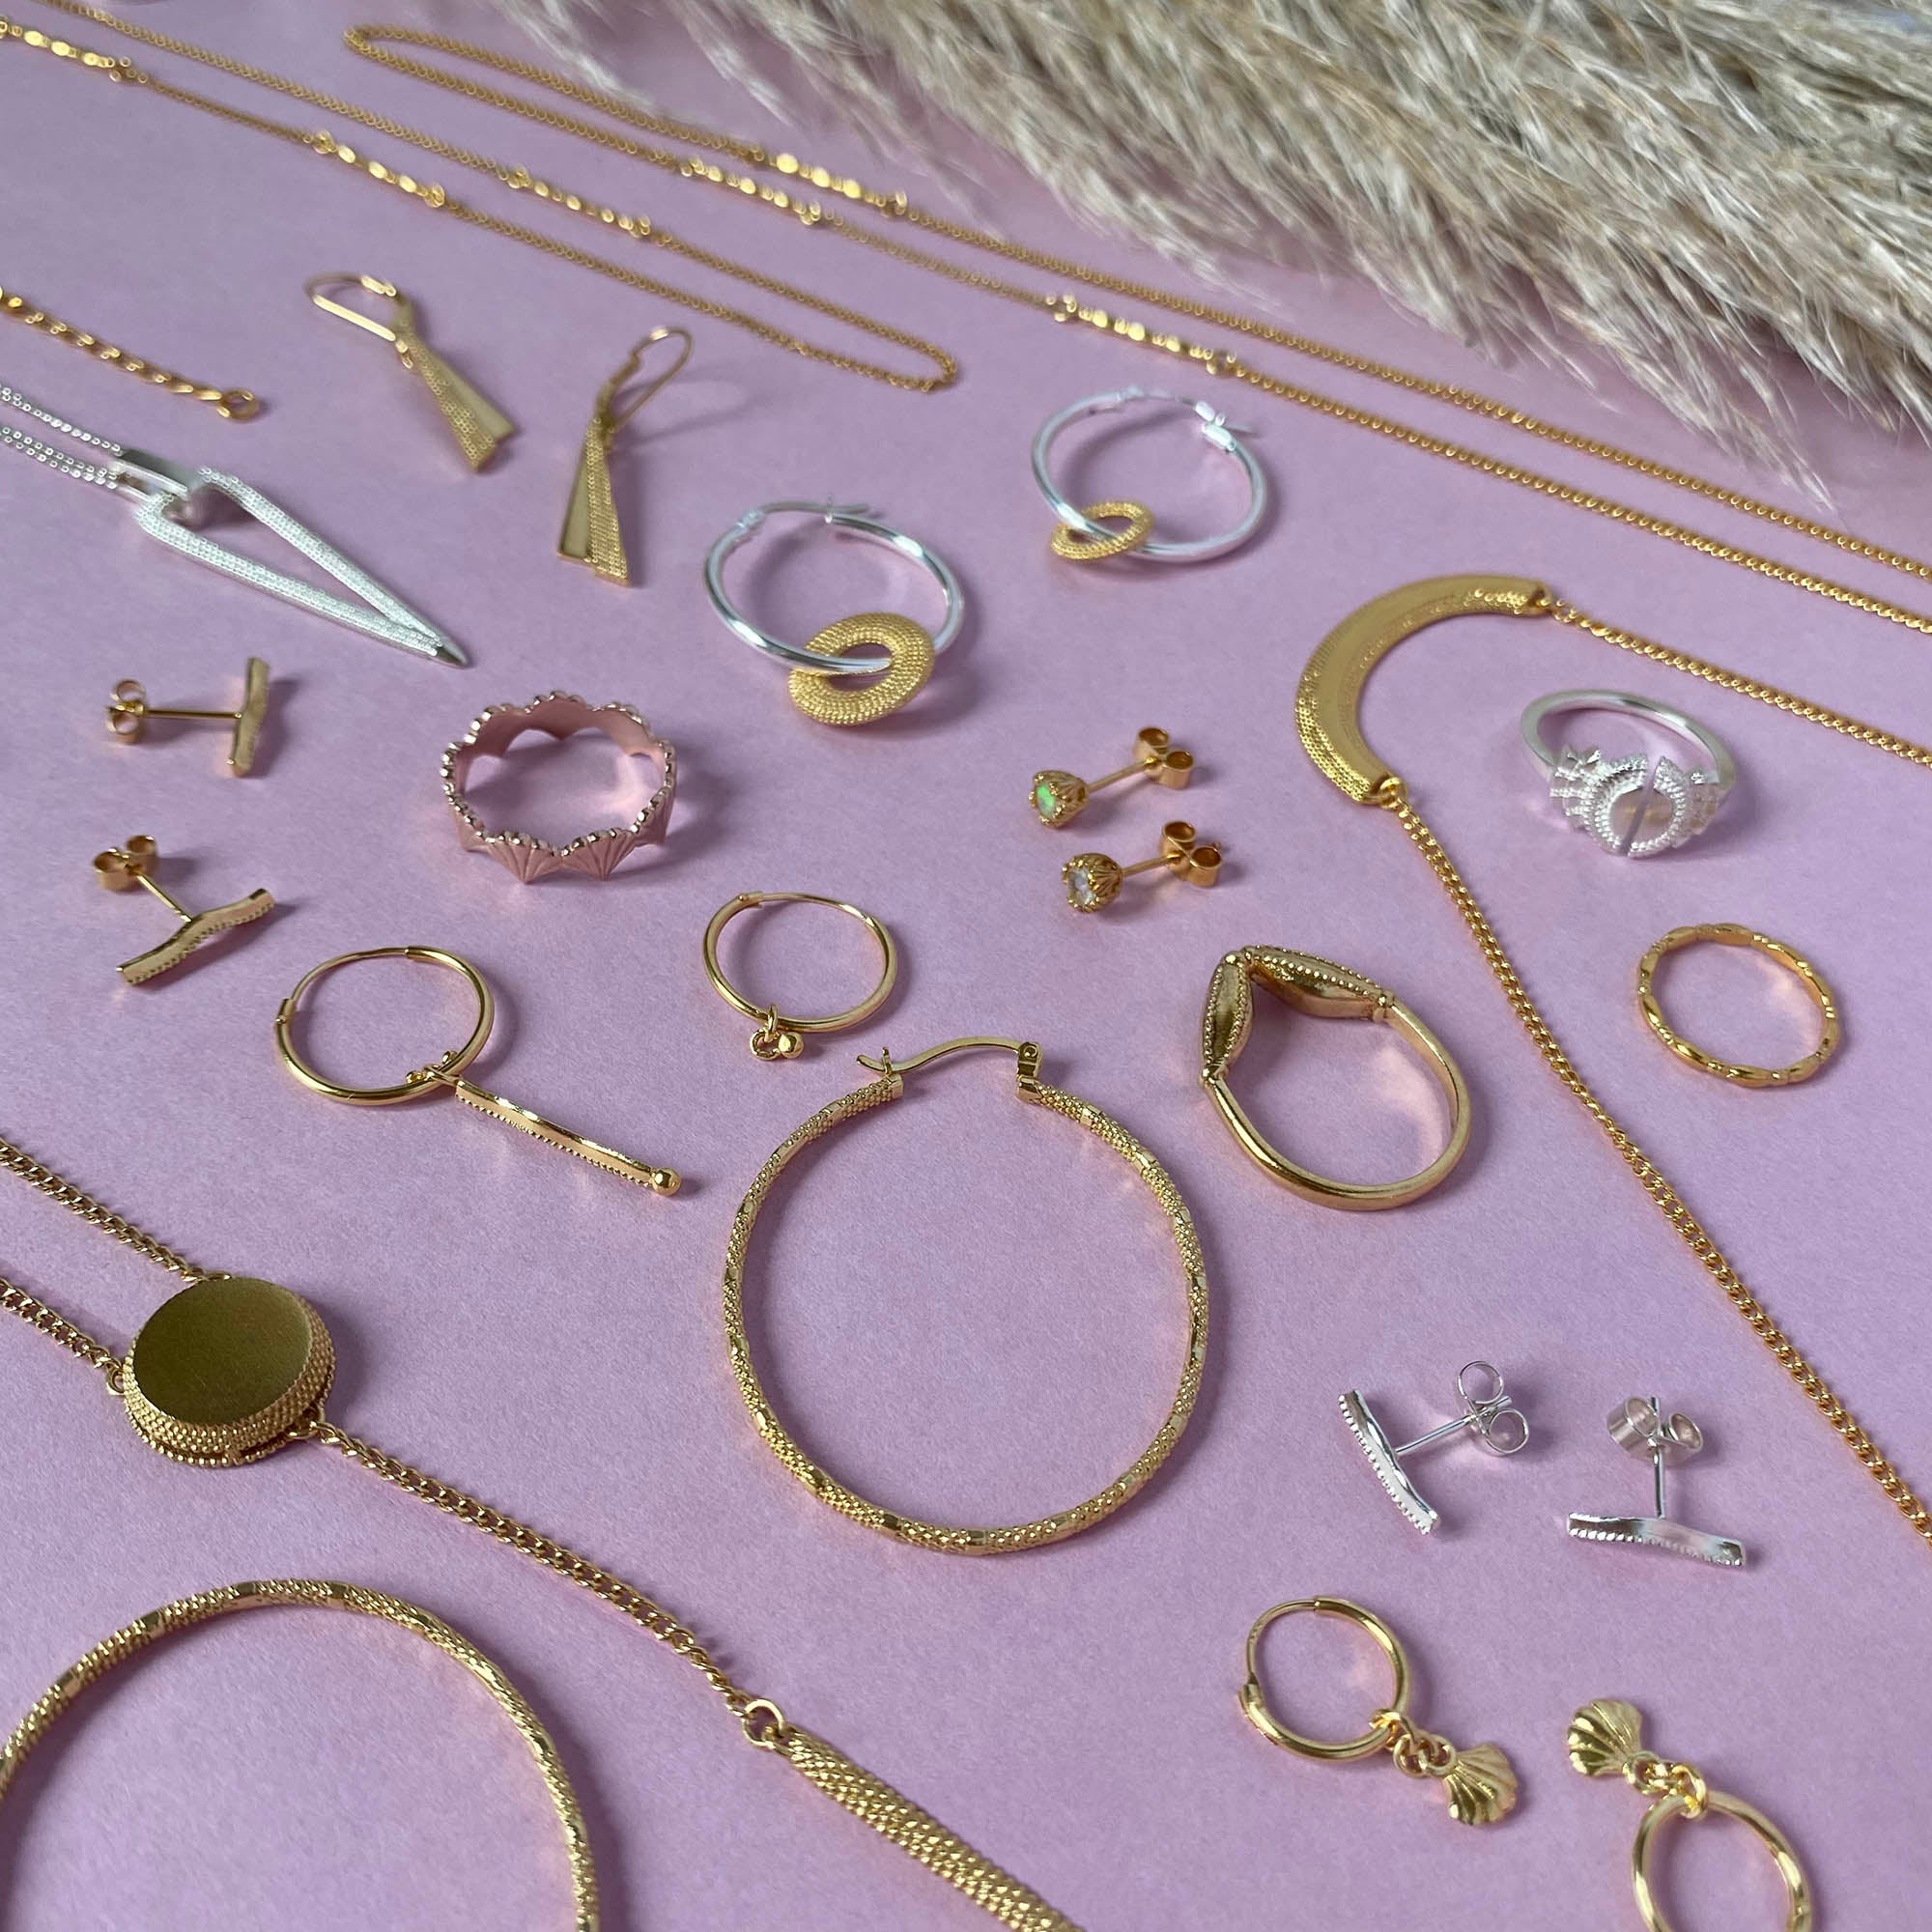 Sample sale jewellery items laid out in display